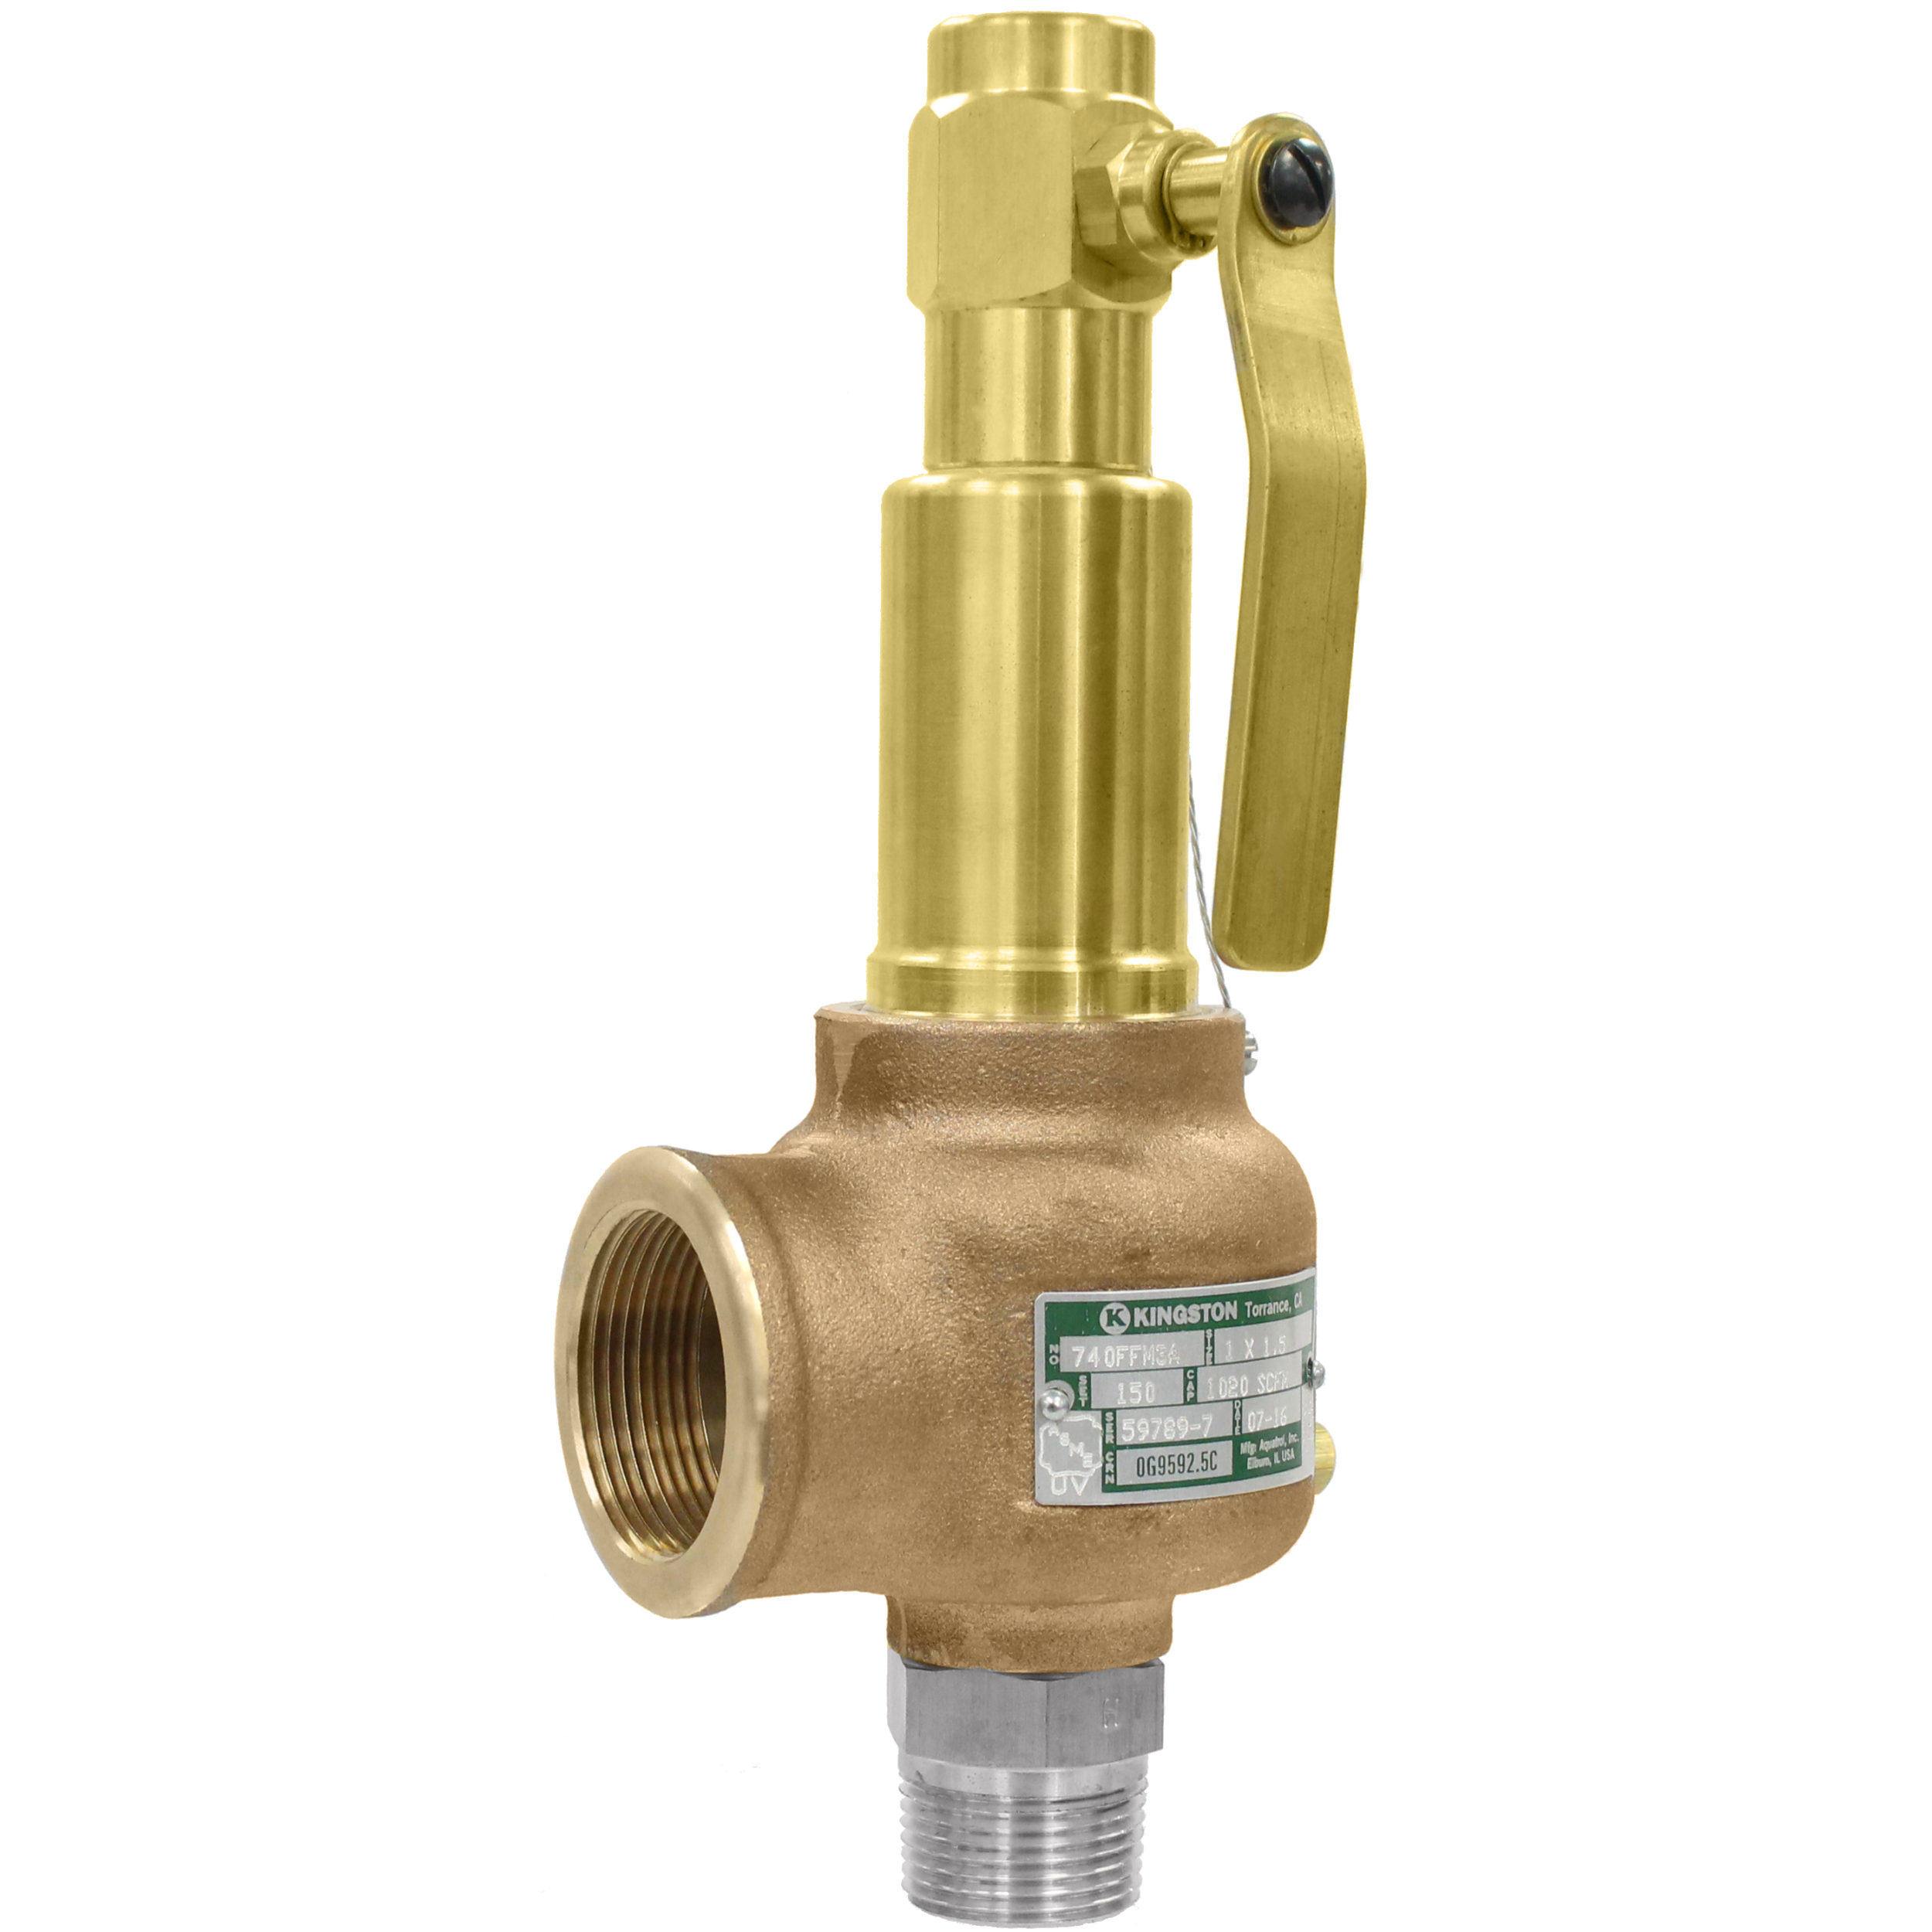 Kingston Valves 710D66N1K1-100 1 x 1/100 psi ASME Section VIII Air/Gas Open Lever Buna-N Disc D Orifice Brass Body and Trim Safety Valve 